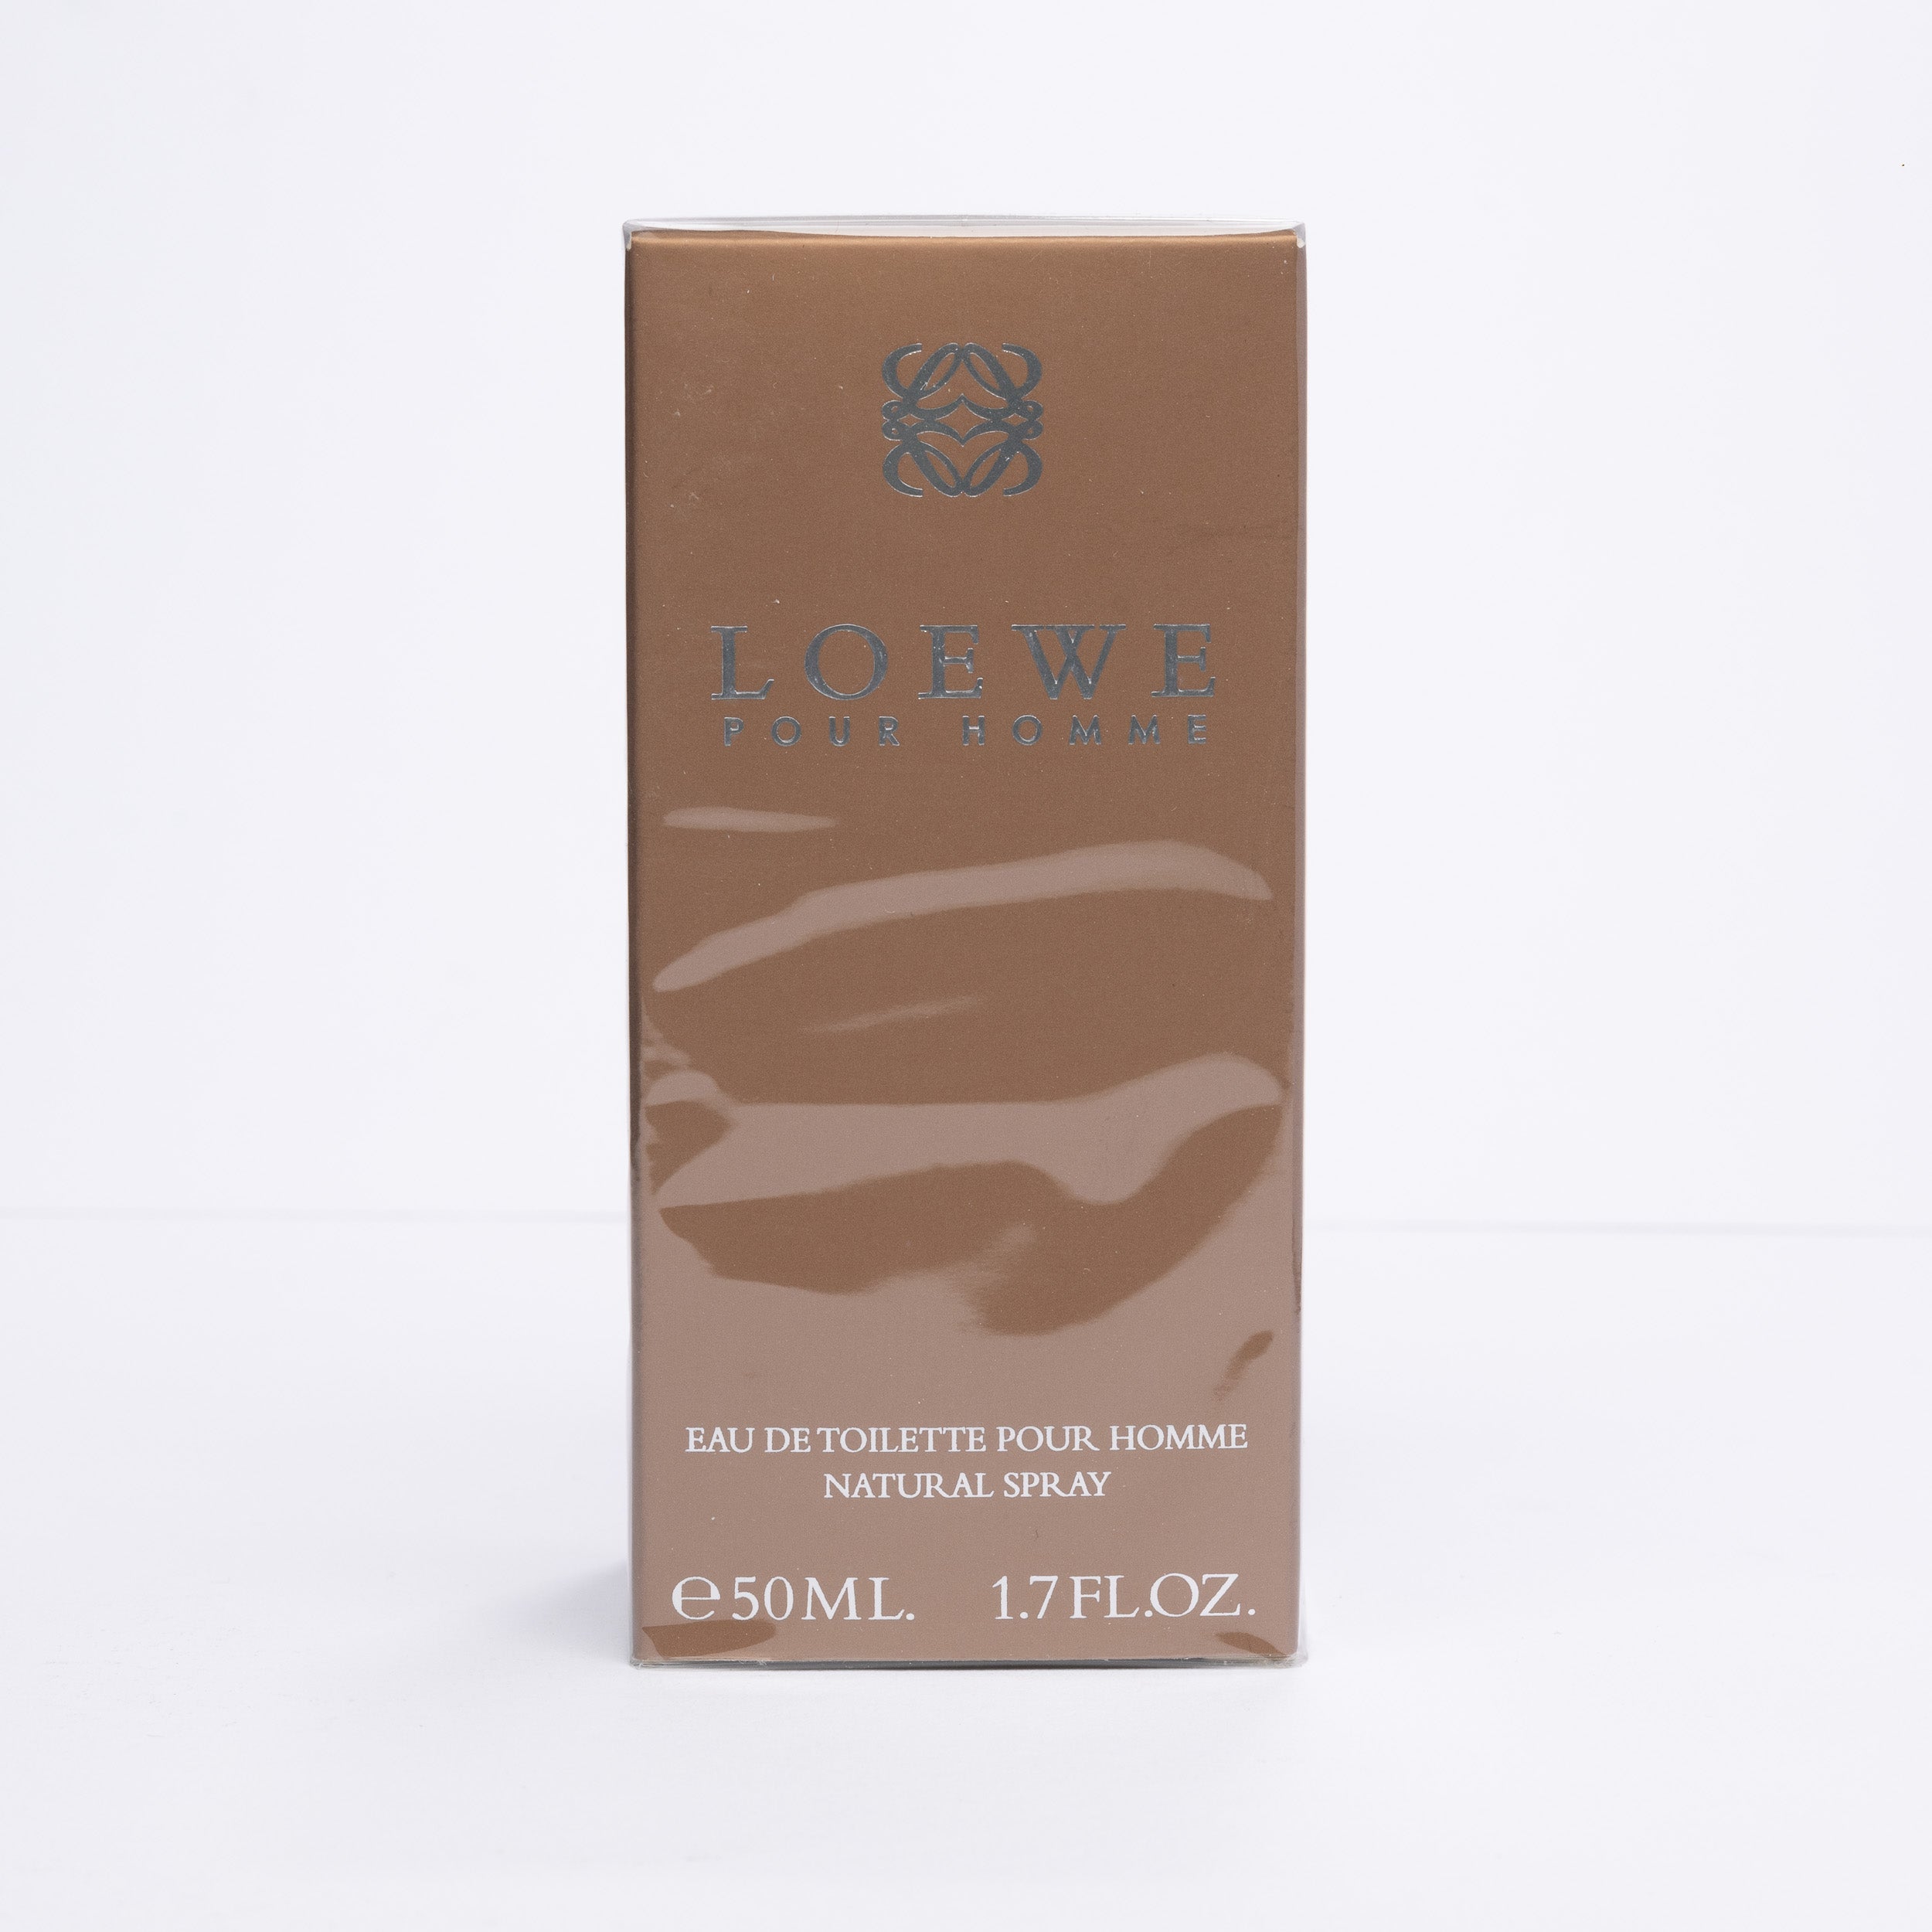 Loewe Pour Homme 50 ml EDT